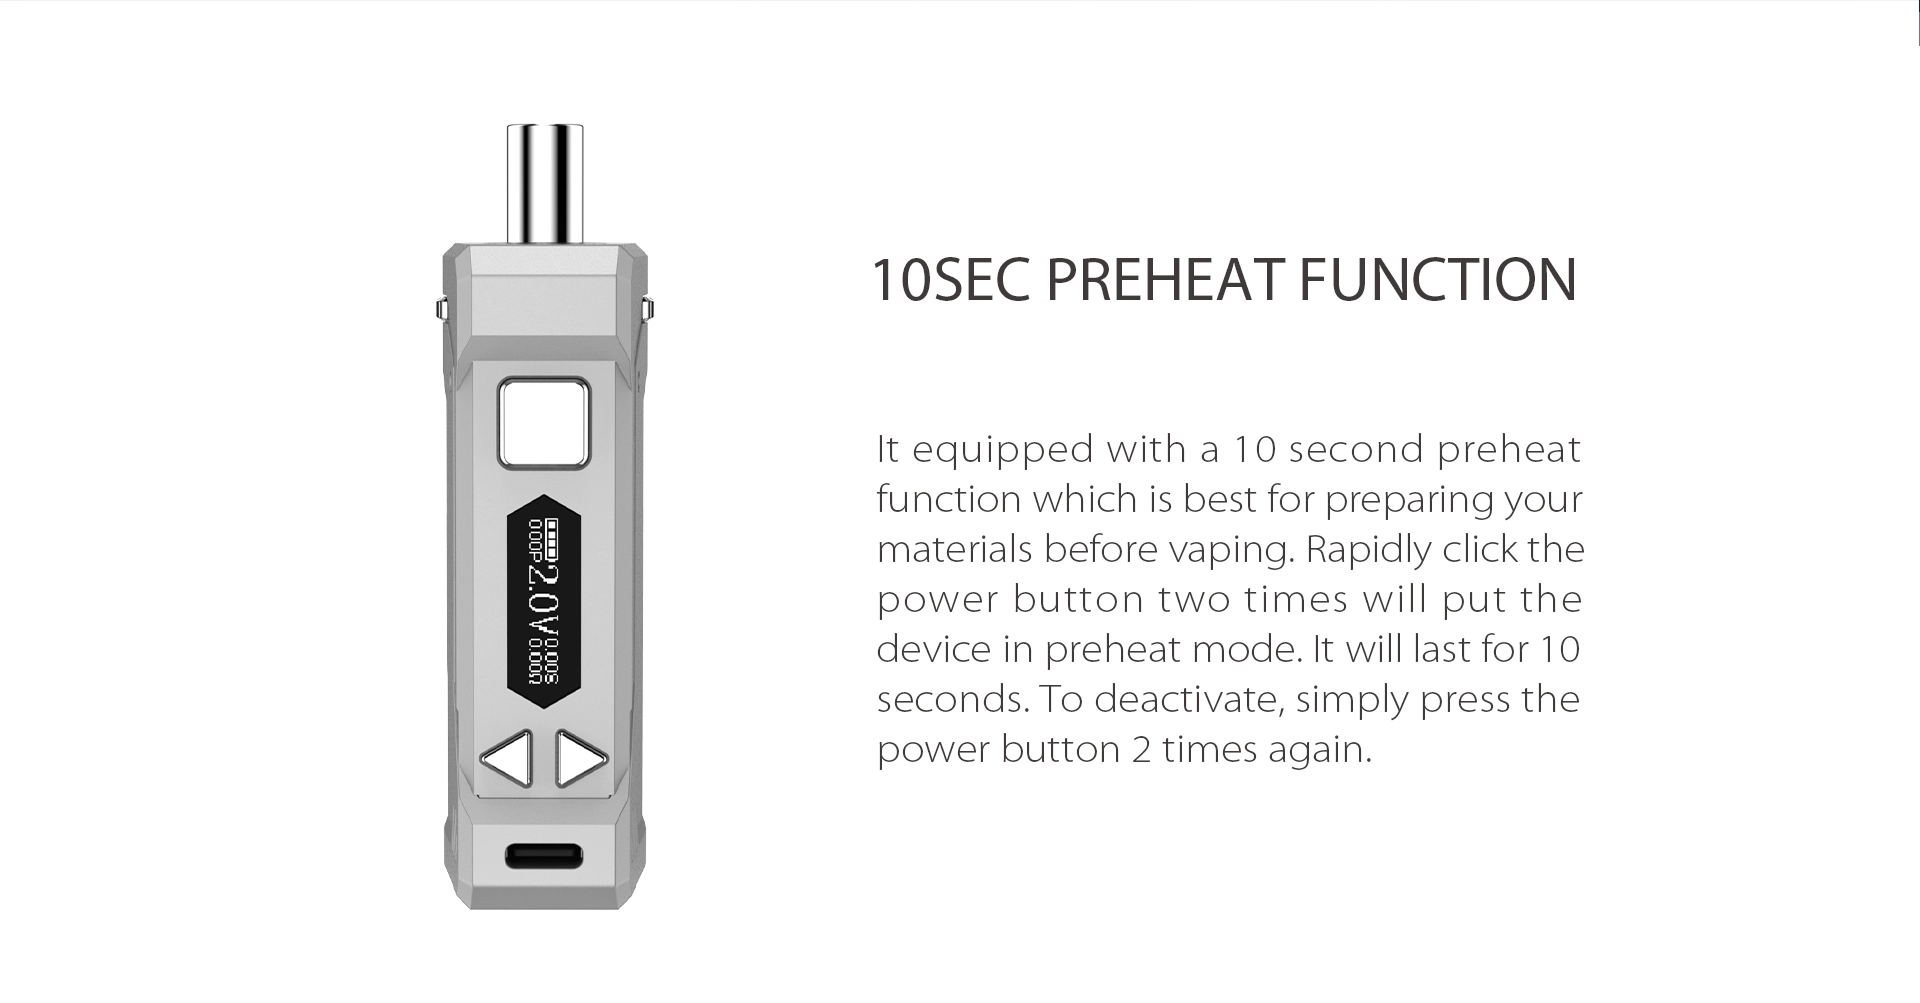 The Yocan UNI Pro equipped with a 10 second preheat function which is best for preparing your materials before vaping.